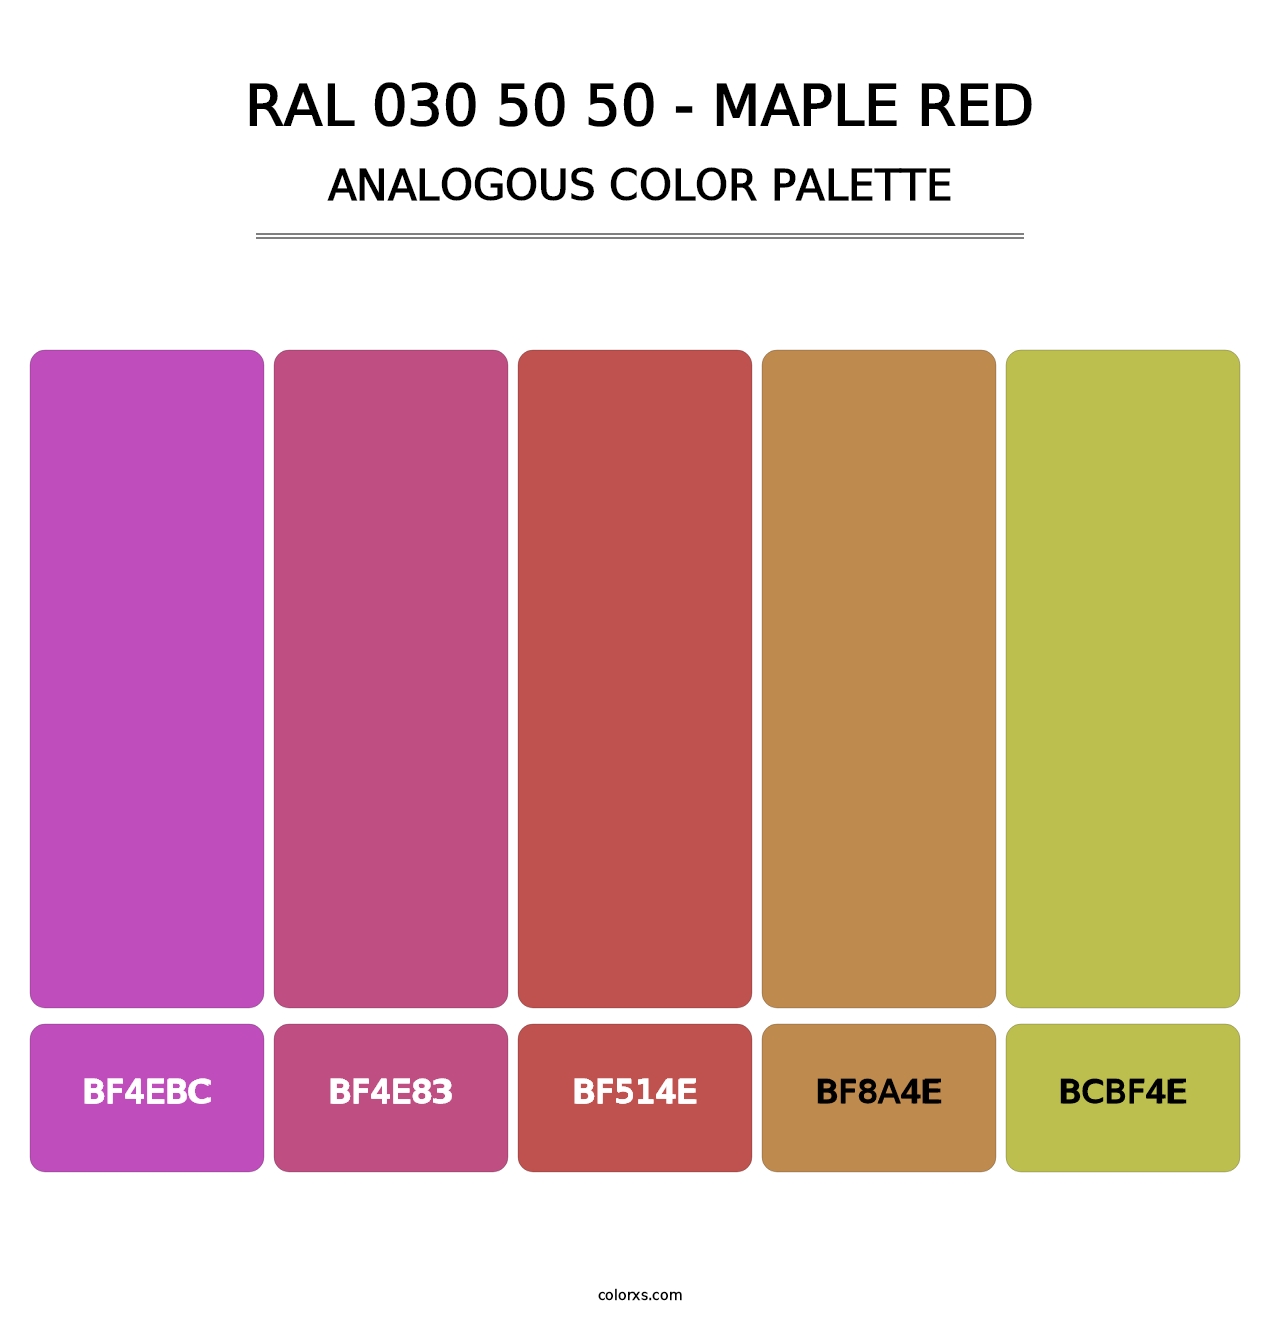 RAL 030 50 50 - Maple Red - Analogous Color Palette